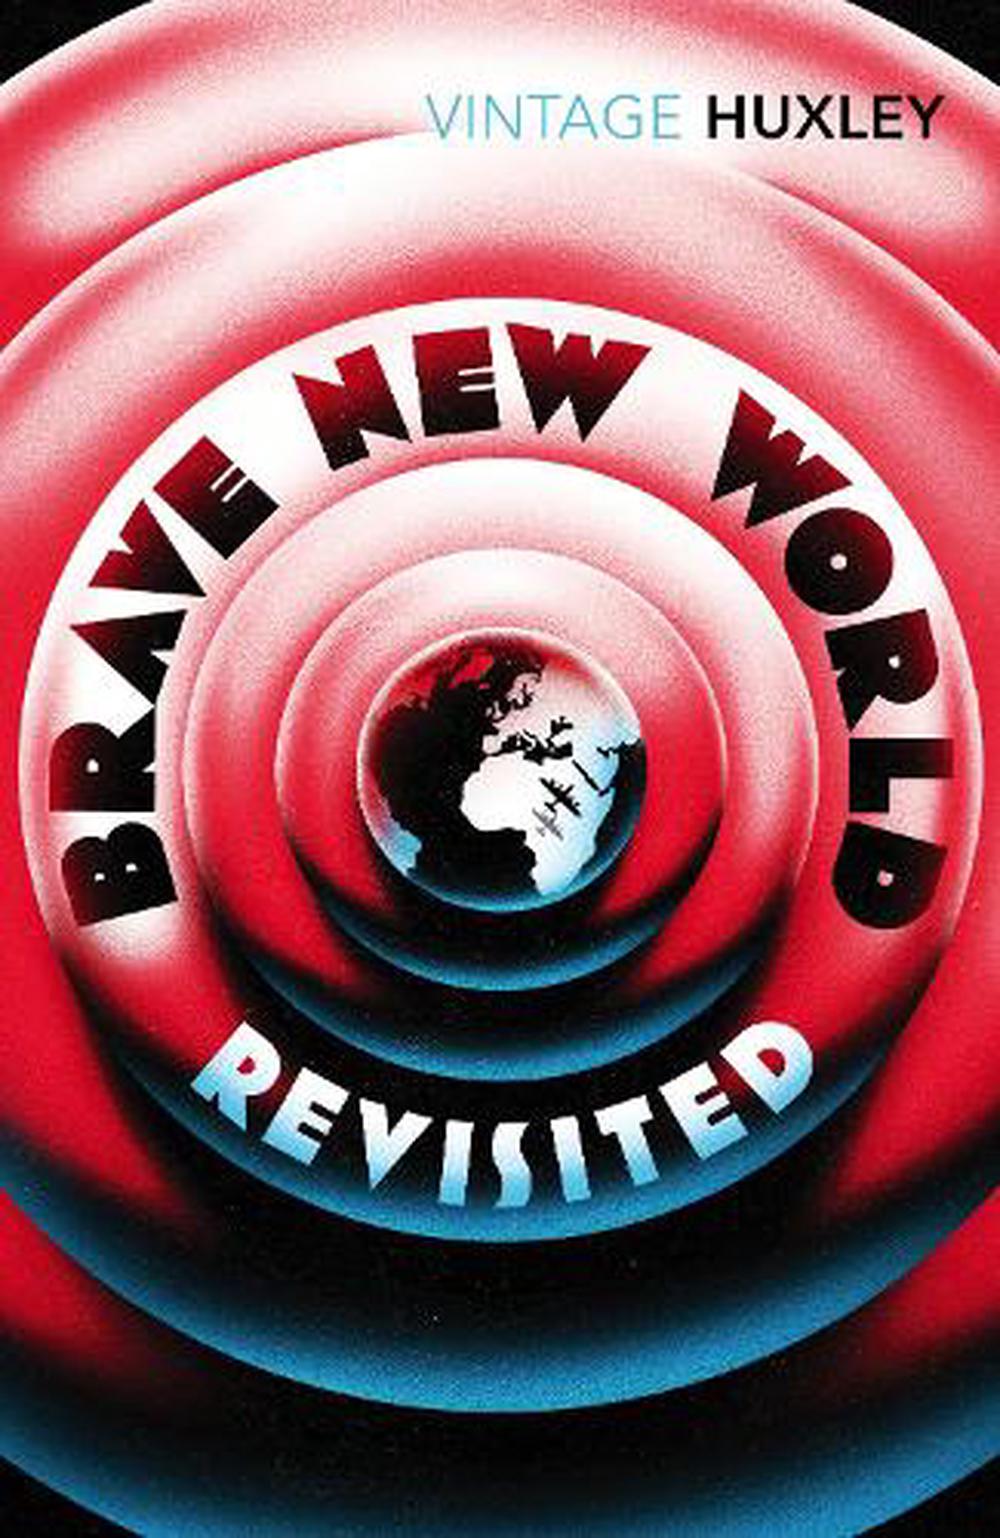 brave new world book review